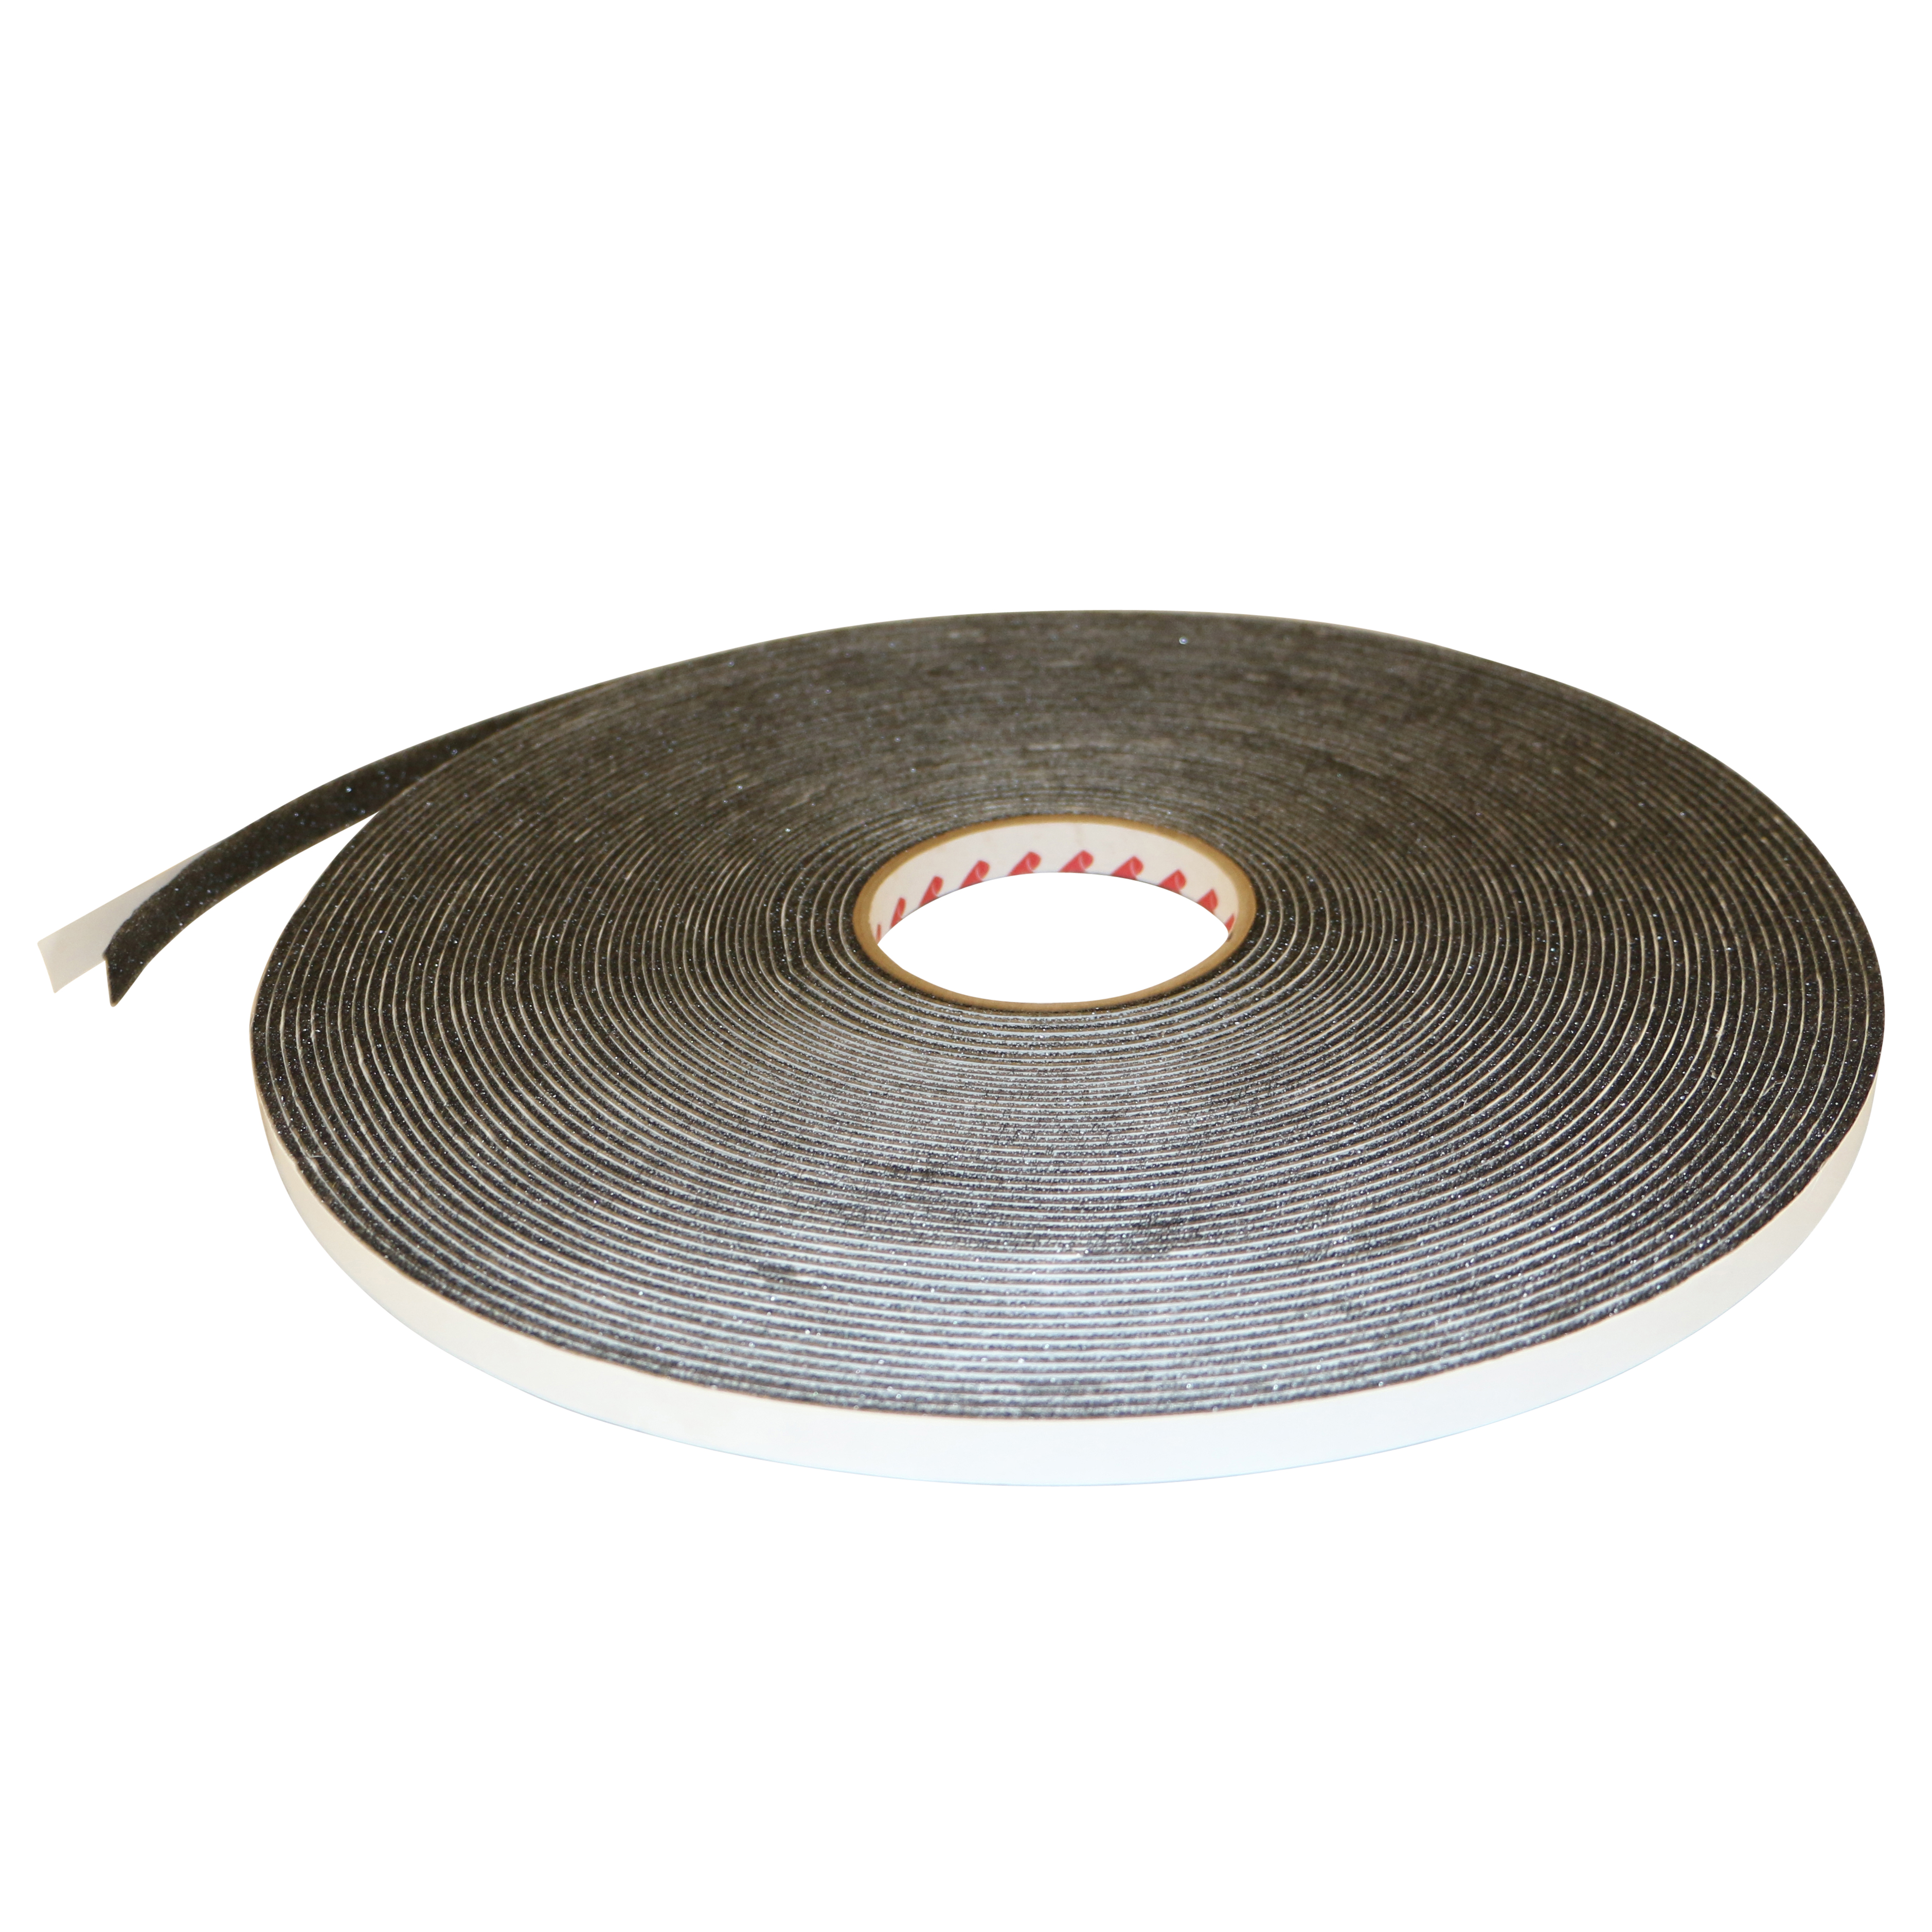 Pres-On P8500 Series Gasketing Foam Tape [Single-Sided, Open Cell]